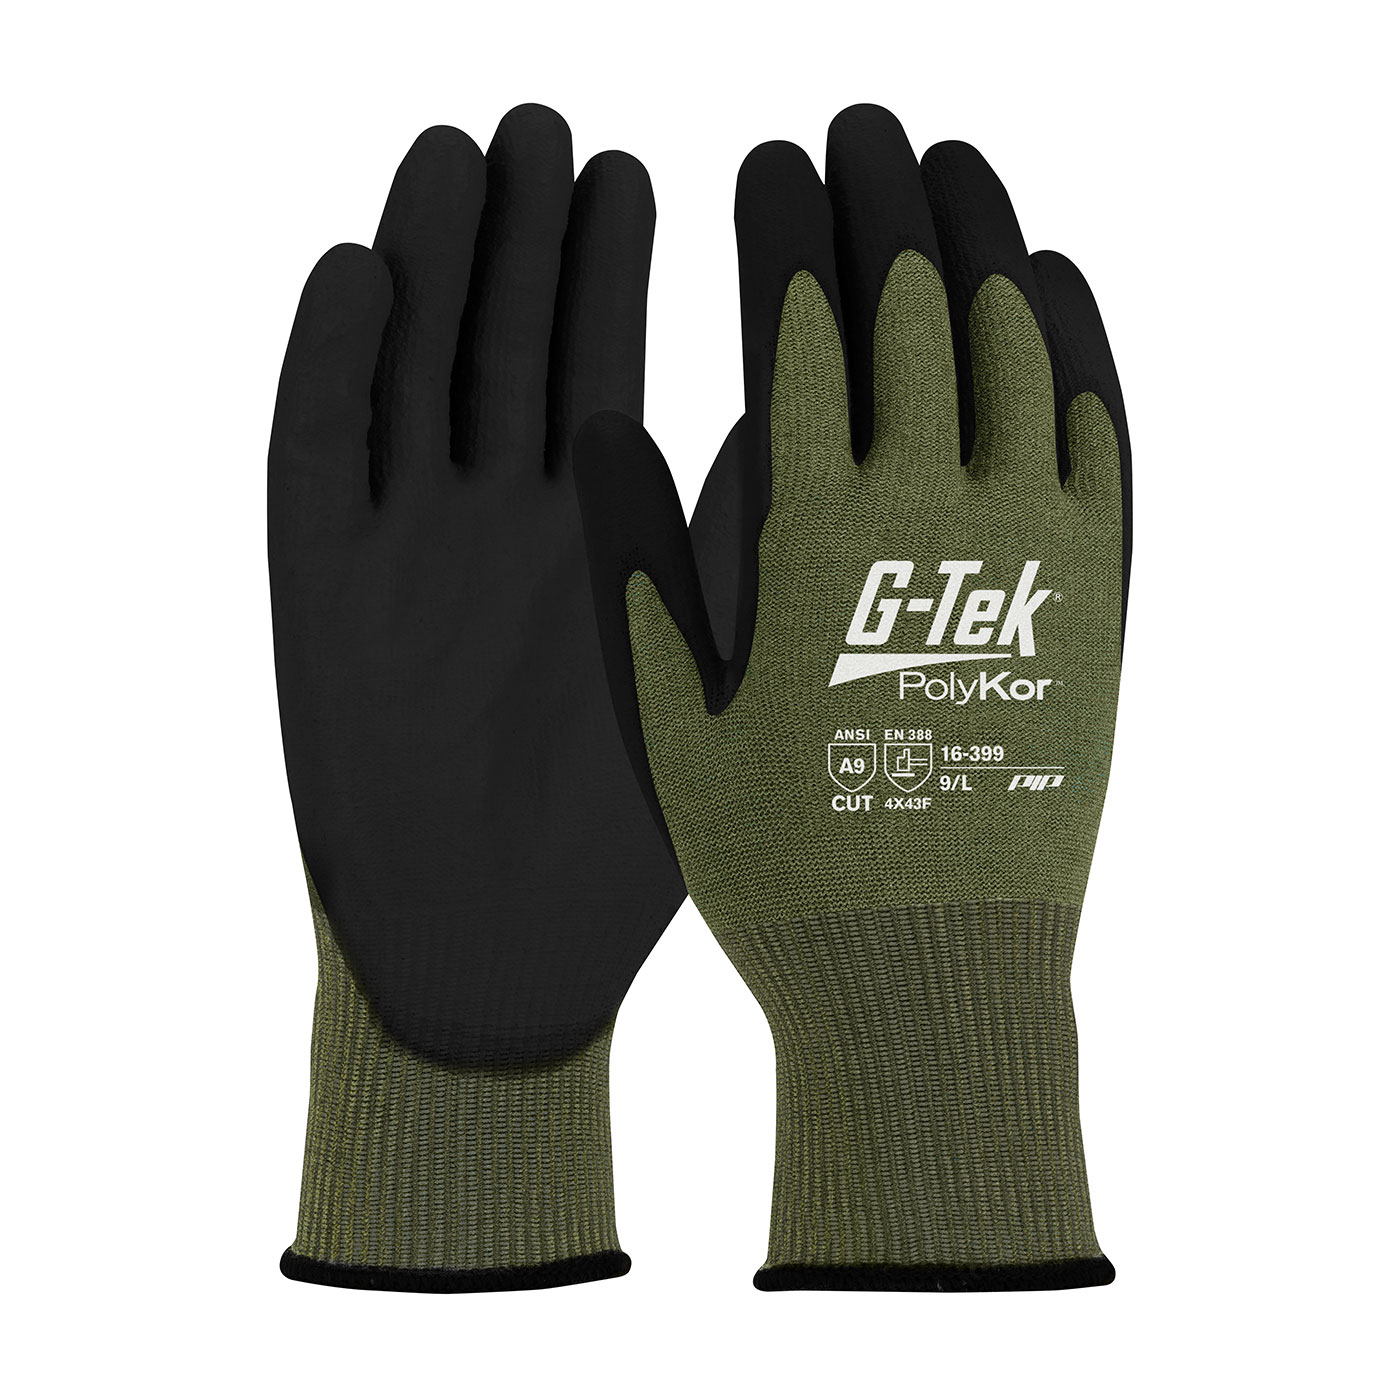 16-399 PIP® G-Tek® PolyKor® X7™ Seamless Knit X7™ Blended Glove with NeoFoam® Coated MicroSurface Grip on Palm & Fingers - Touchscreen Compatible